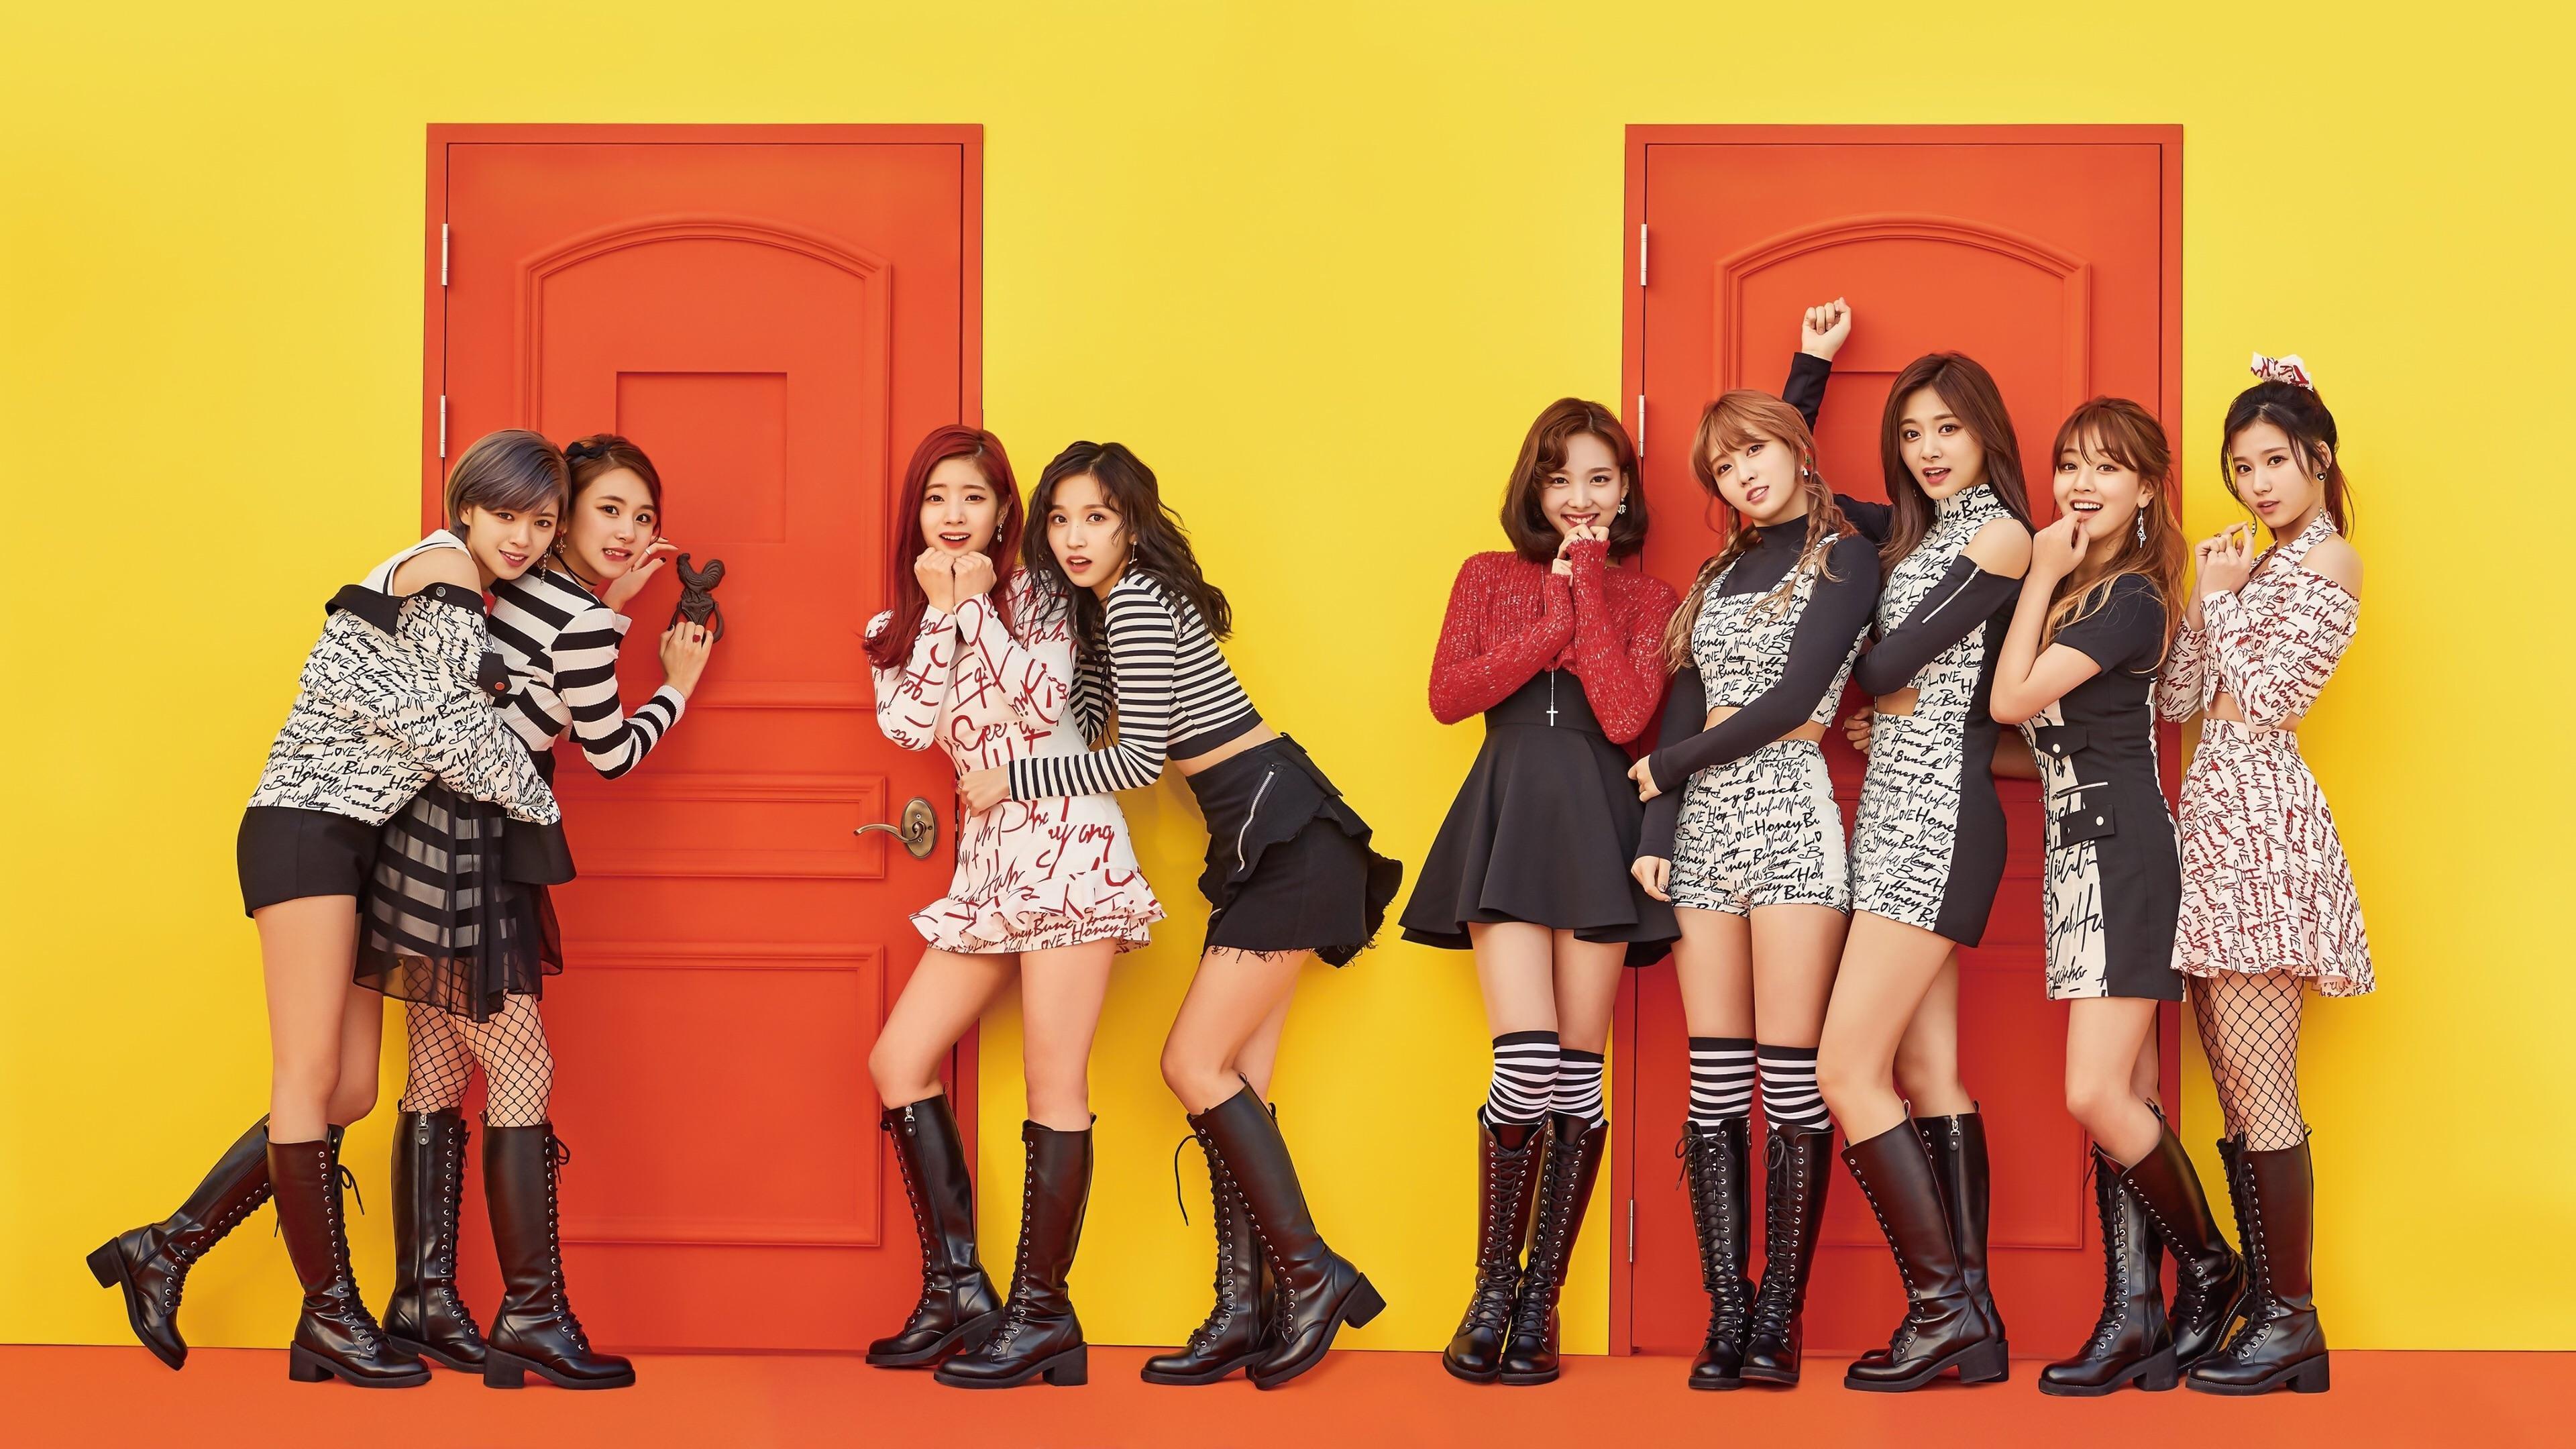 Twice 4K wallpaper for your desktop or mobile screen free